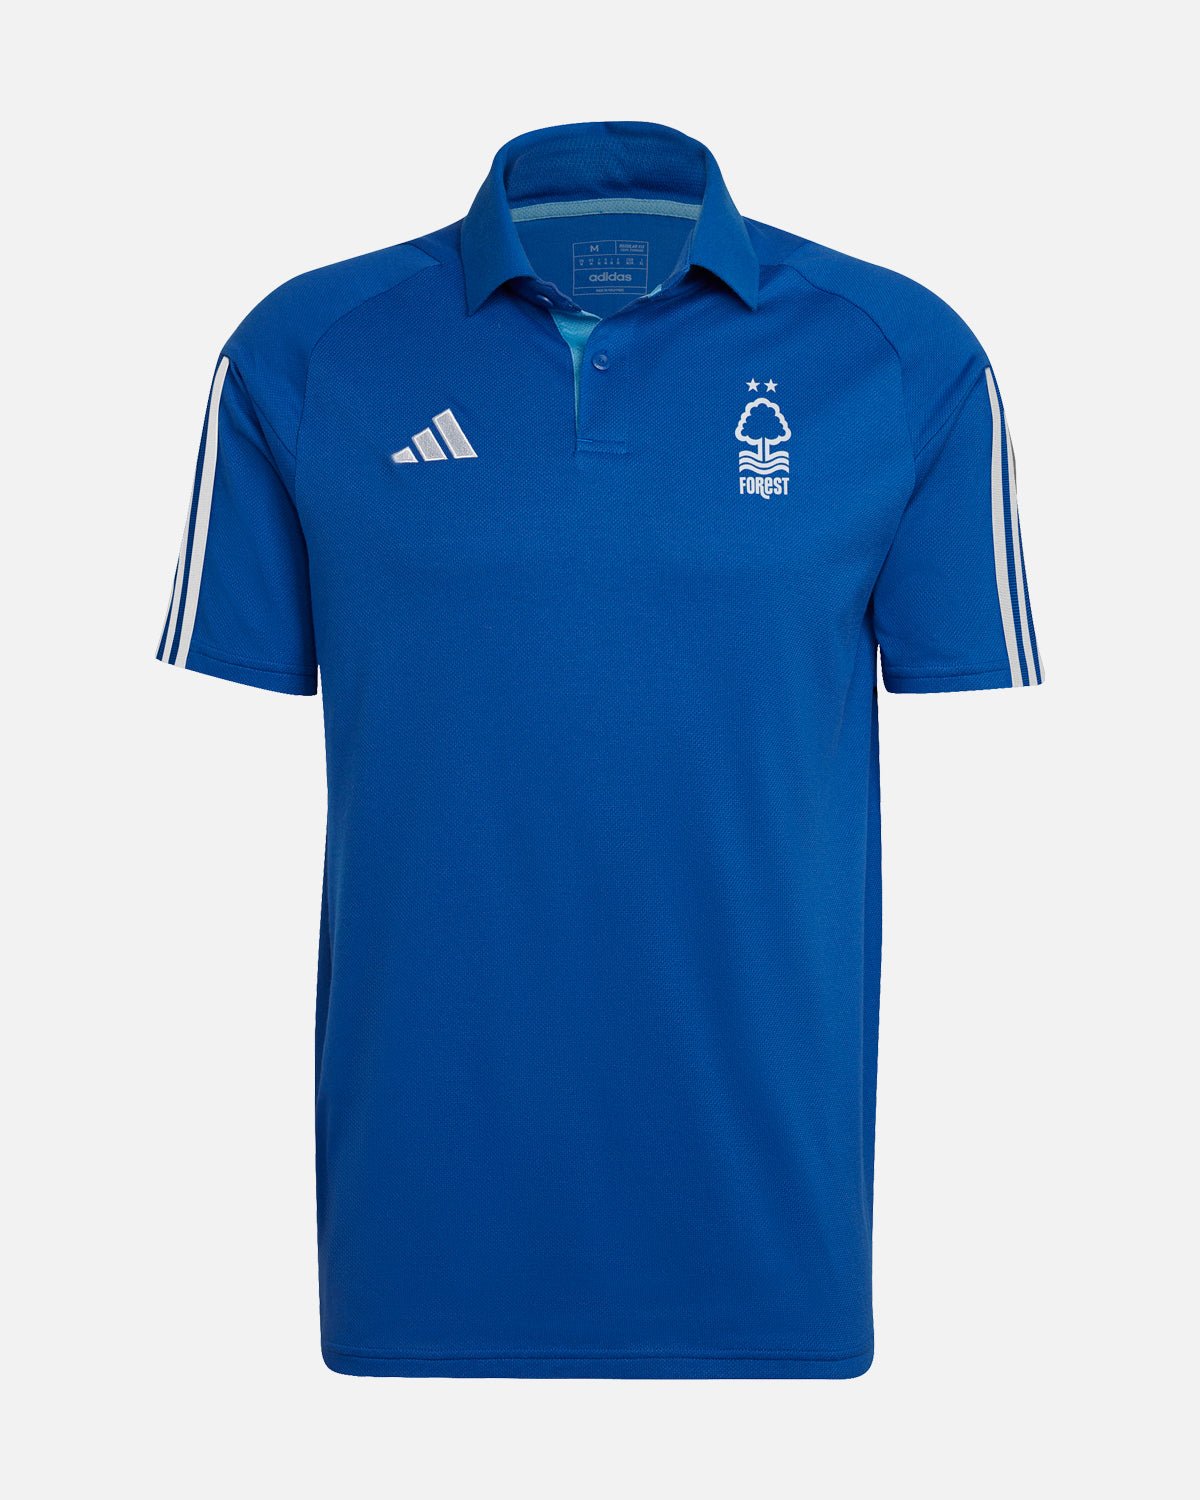 NFFC Royal Travel Polo 23-24 - Nottingham Forest FC